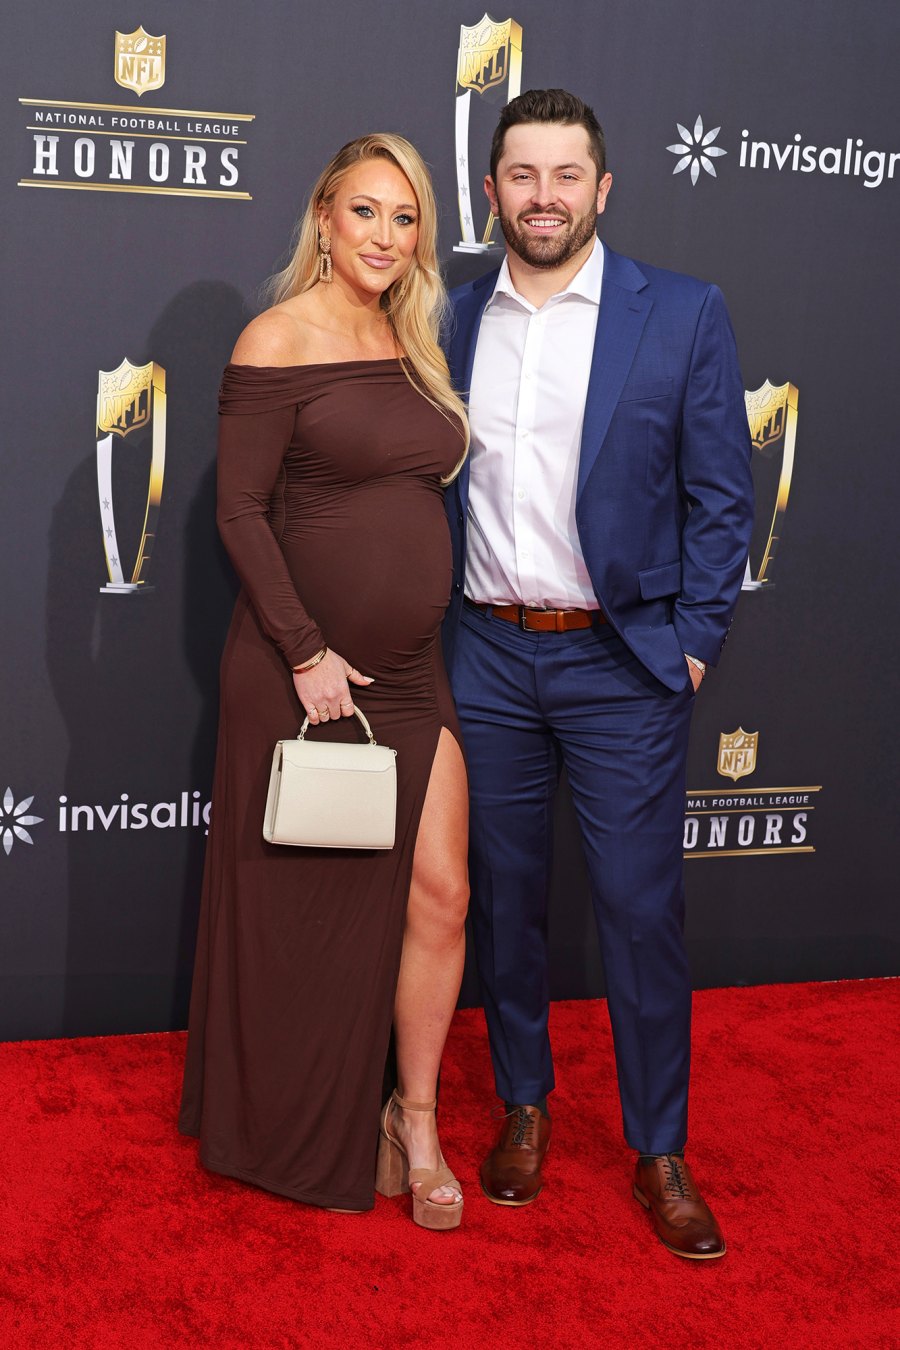 The Best Looks at the NFL Honors Gallery